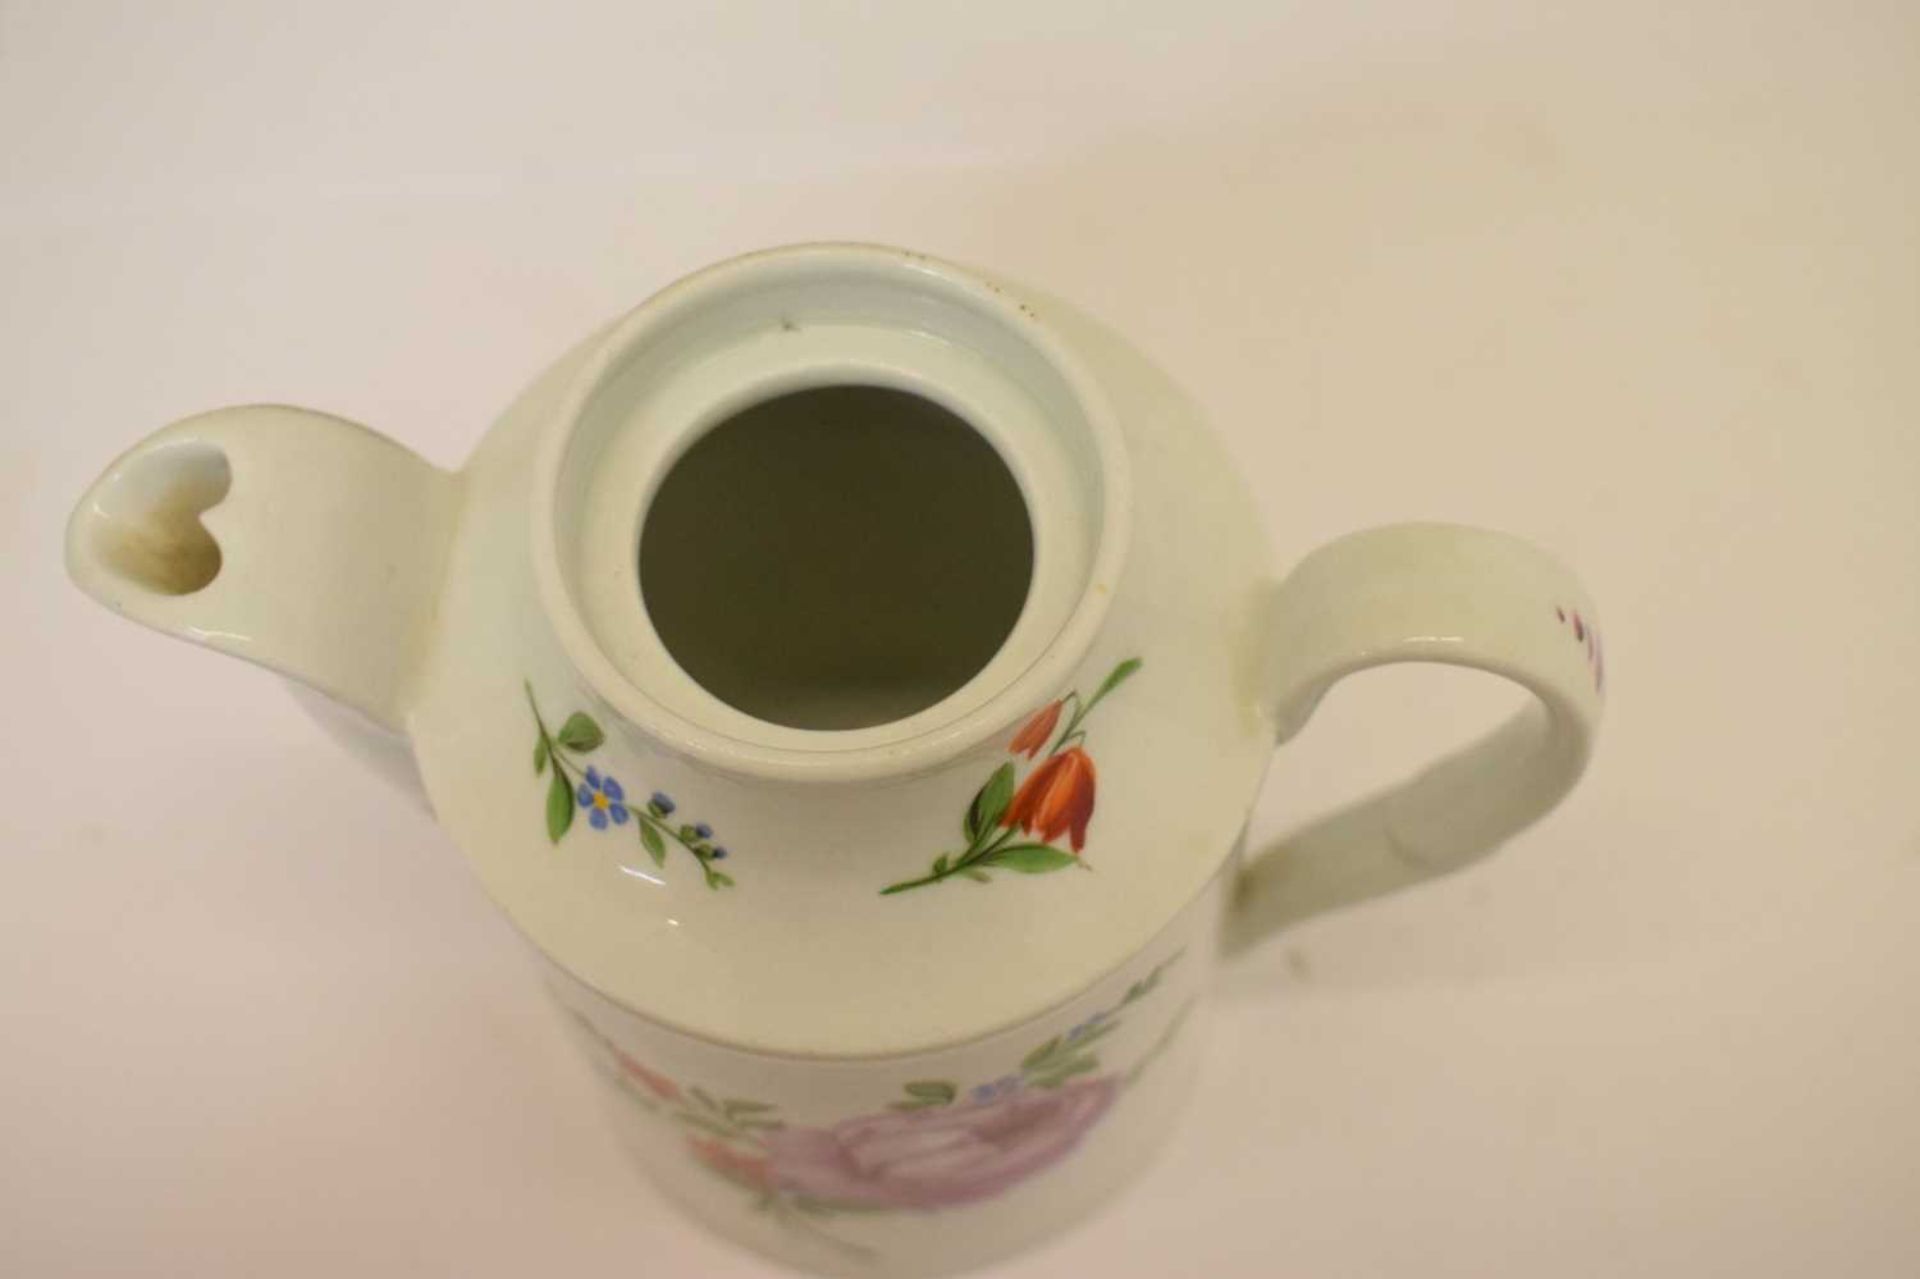 18th century Bristol (Champions) porcelain teapot and cover - Image 15 of 18